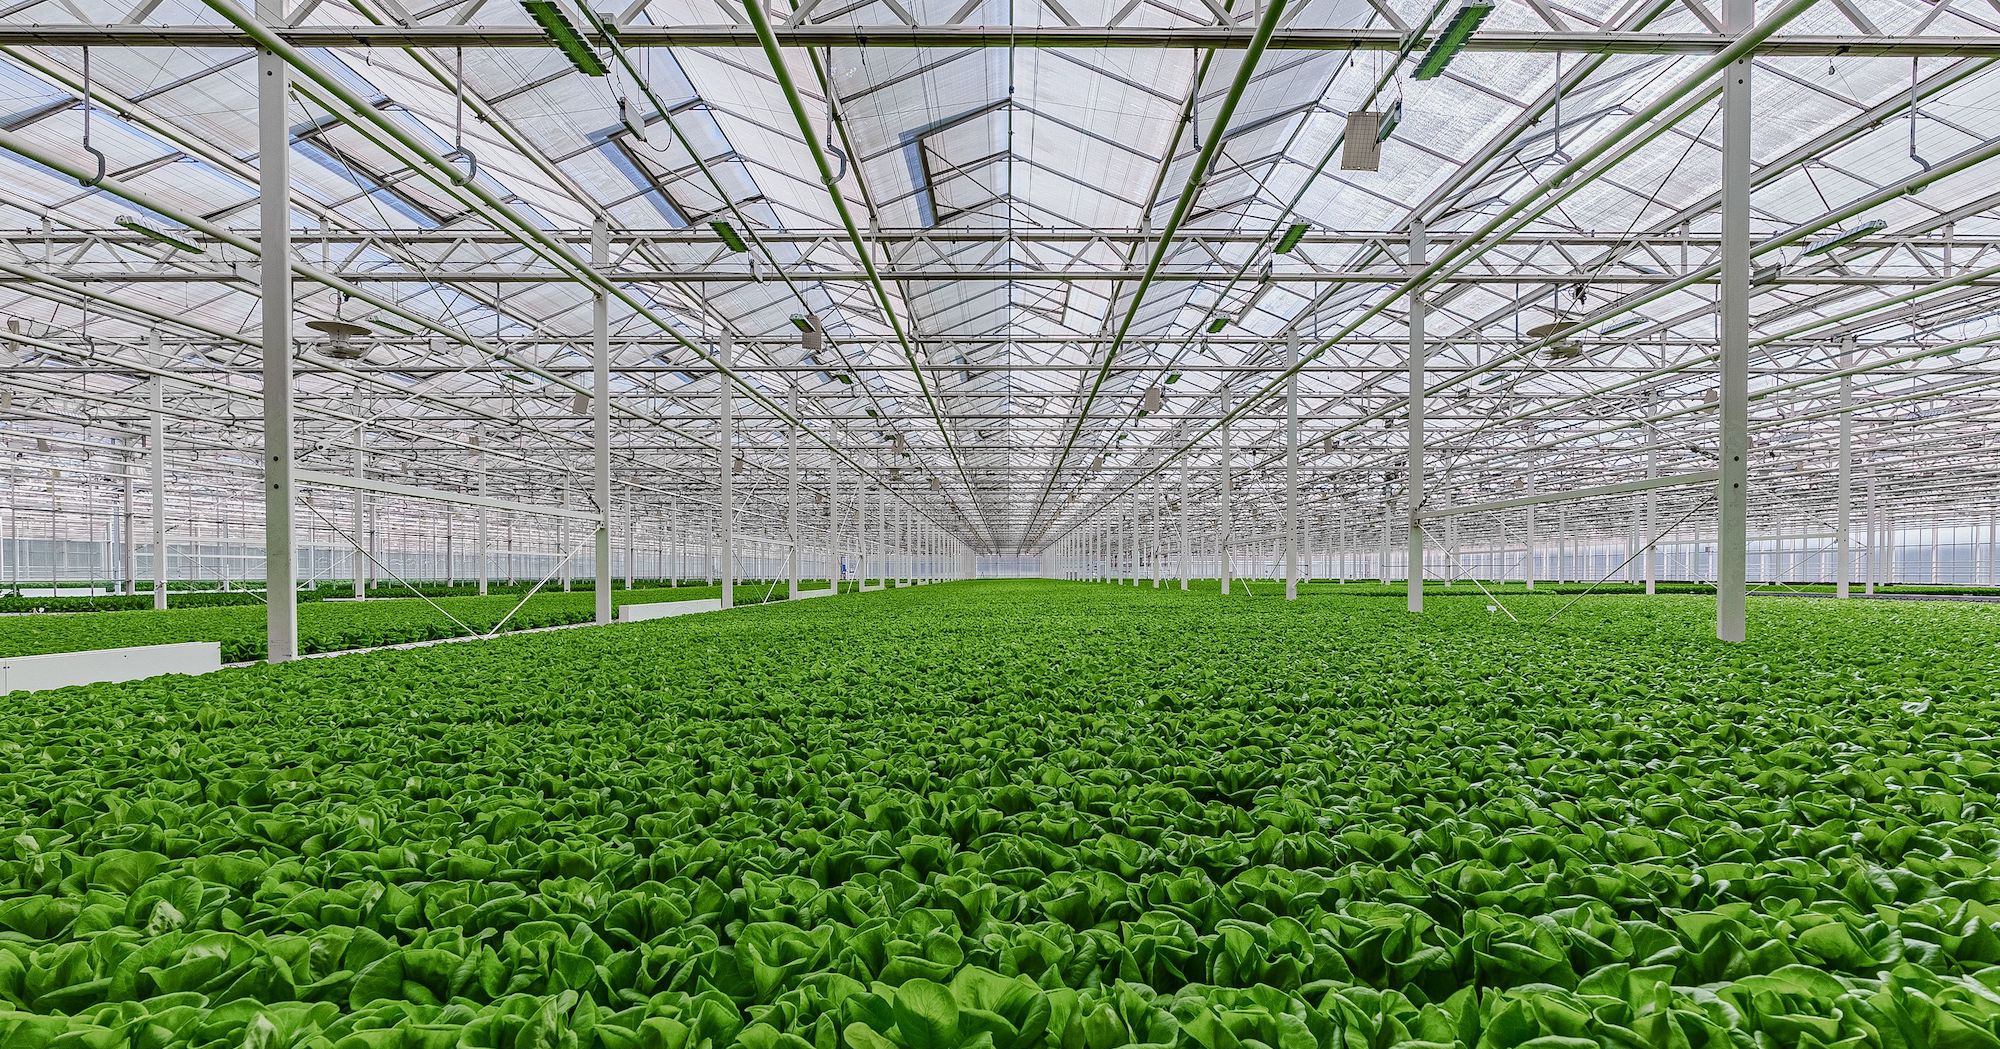 Indoor Farming Pioneer Gotham Greens Is Expanding to North Texas